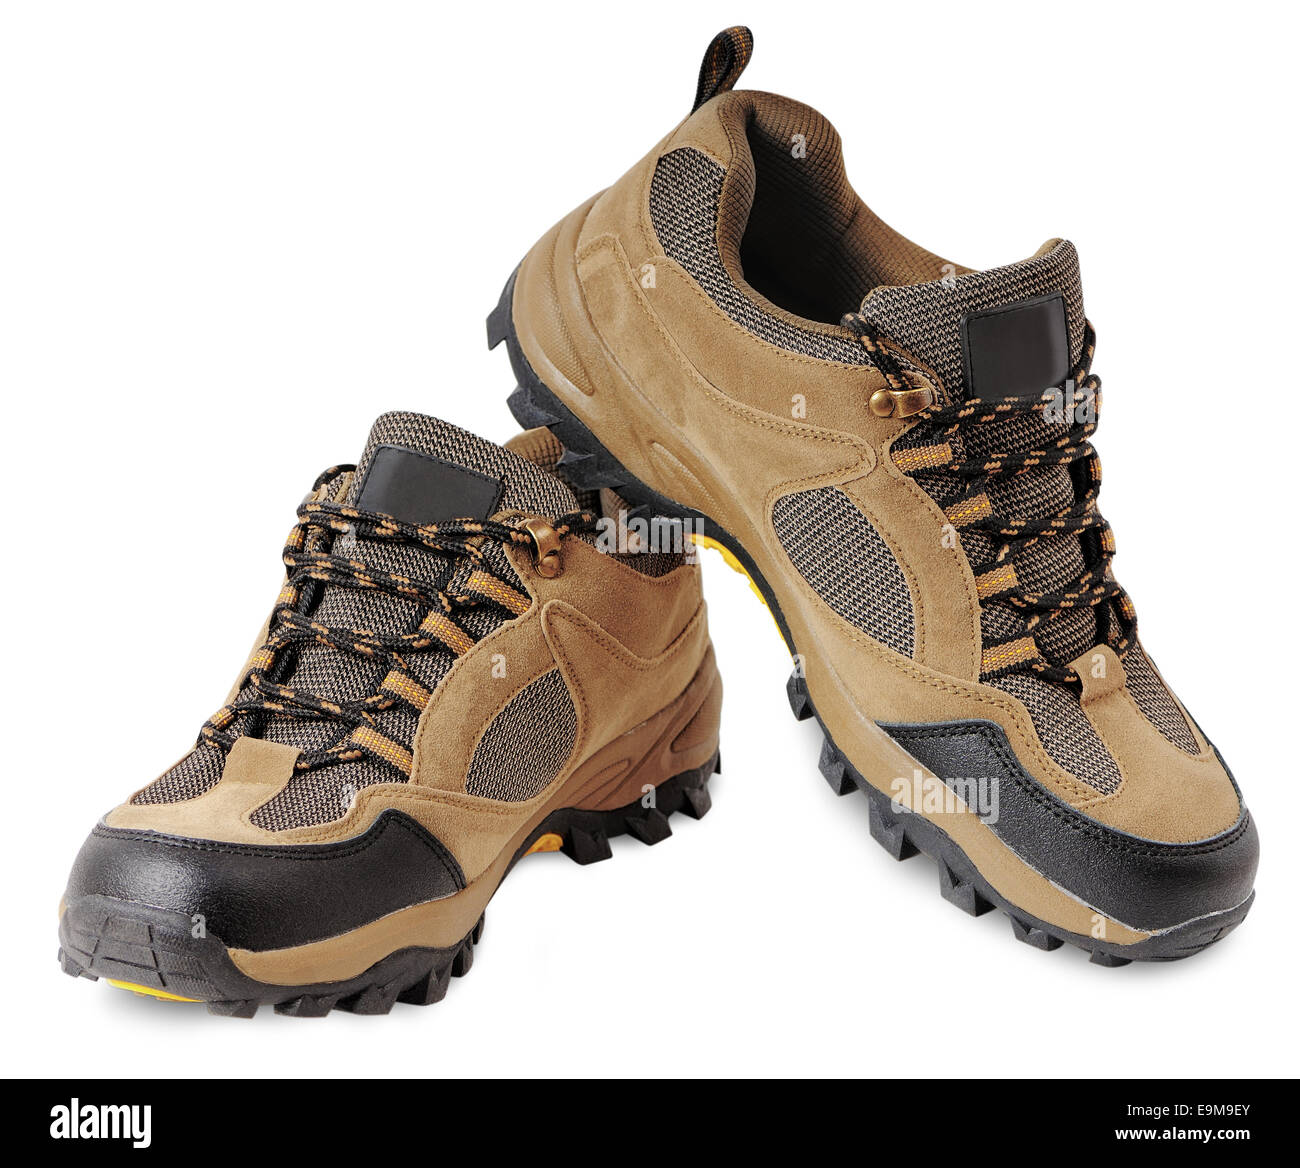 Hiking shoes for recreation and travel outdoors Stock Photo